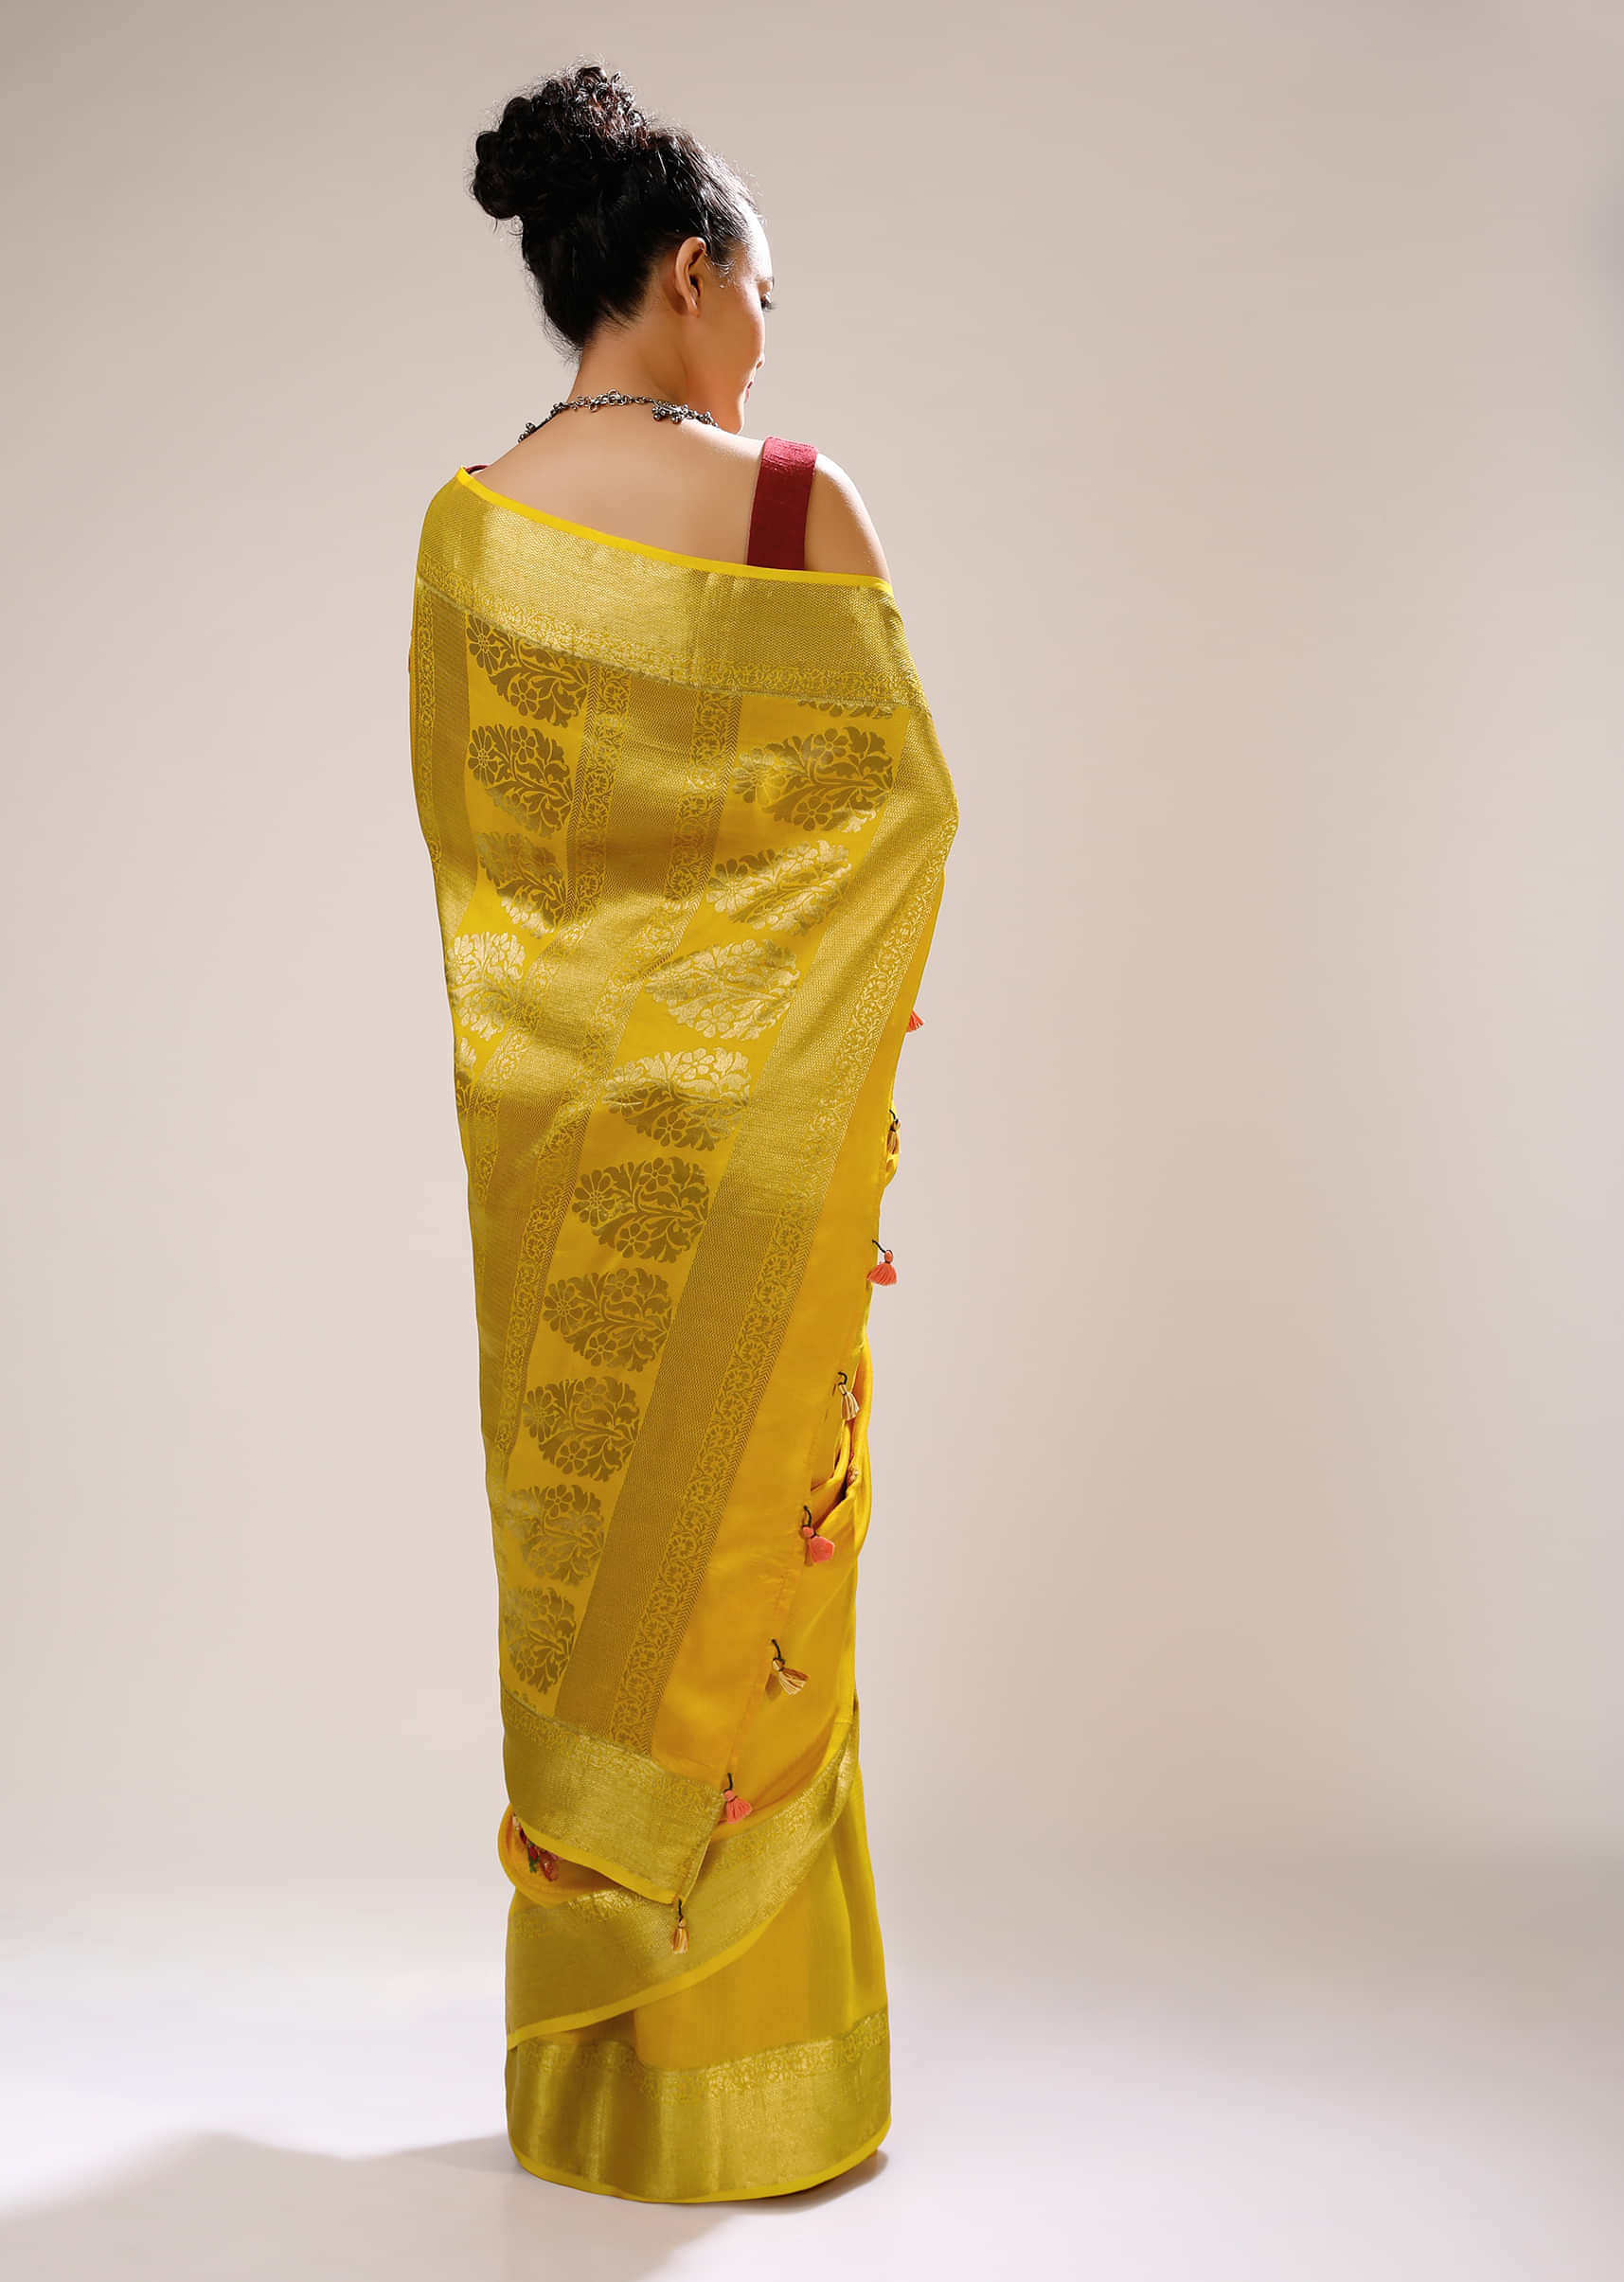 Golden Glow Saree In Silk Blend With Checks Weave, Multi Colored Bud Embroidered Floral Motifs And Brocade Border  